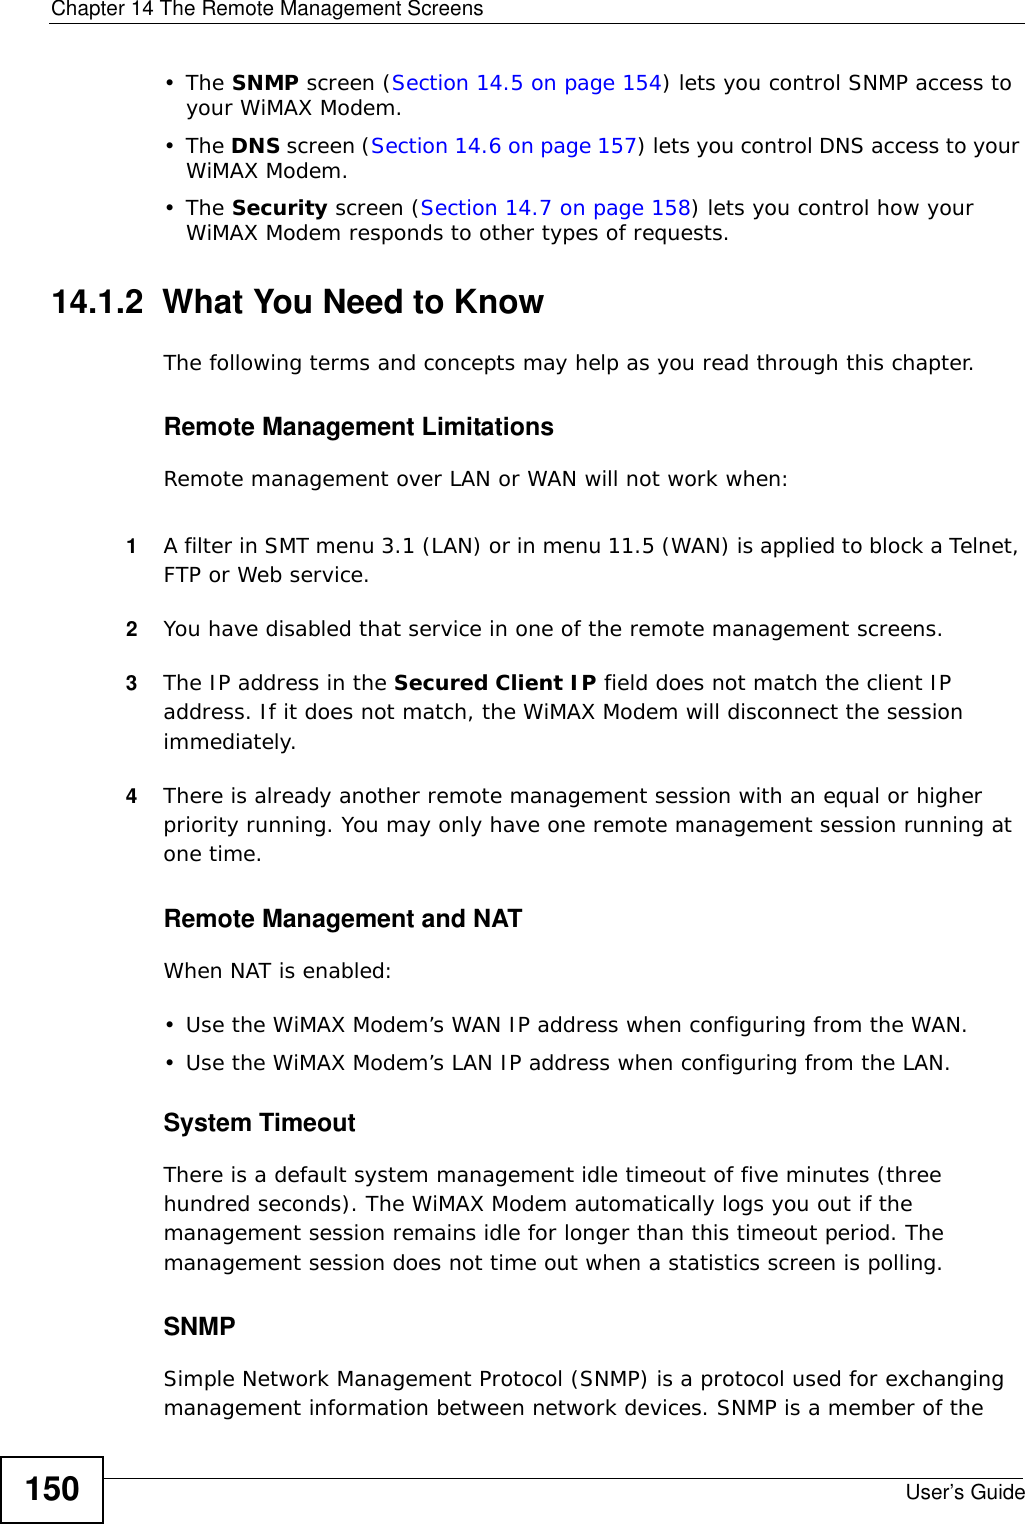 Chapter 14 The Remote Management ScreensUser’s Guide150•The SNMP screen (Section 14.5 on page 154) lets you control SNMP access to your WiMAX Modem.•The DNS screen (Section 14.6 on page 157) lets you control DNS access to your WiMAX Modem.•The Security screen (Section 14.7 on page 158) lets you control how your WiMAX Modem responds to other types of requests.14.1.2  What You Need to KnowThe following terms and concepts may help as you read through this chapter.Remote Management LimitationsRemote management over LAN or WAN will not work when:1A filter in SMT menu 3.1 (LAN) or in menu 11.5 (WAN) is applied to block a Telnet, FTP or Web service. 2You have disabled that service in one of the remote management screens.3The IP address in the Secured Client IP field does not match the client IP address. If it does not match, the WiMAX Modem will disconnect the session immediately.4There is already another remote management session with an equal or higher priority running. You may only have one remote management session running at one time.Remote Management and NATWhen NAT is enabled:• Use the WiMAX Modem’s WAN IP address when configuring from the WAN. • Use the WiMAX Modem’s LAN IP address when configuring from the LAN.System TimeoutThere is a default system management idle timeout of five minutes (three hundred seconds). The WiMAX Modem automatically logs you out if the management session remains idle for longer than this timeout period. The management session does not time out when a statistics screen is polling.SNMPSimple Network Management Protocol (SNMP) is a protocol used for exchanging management information between network devices. SNMP is a member of the 